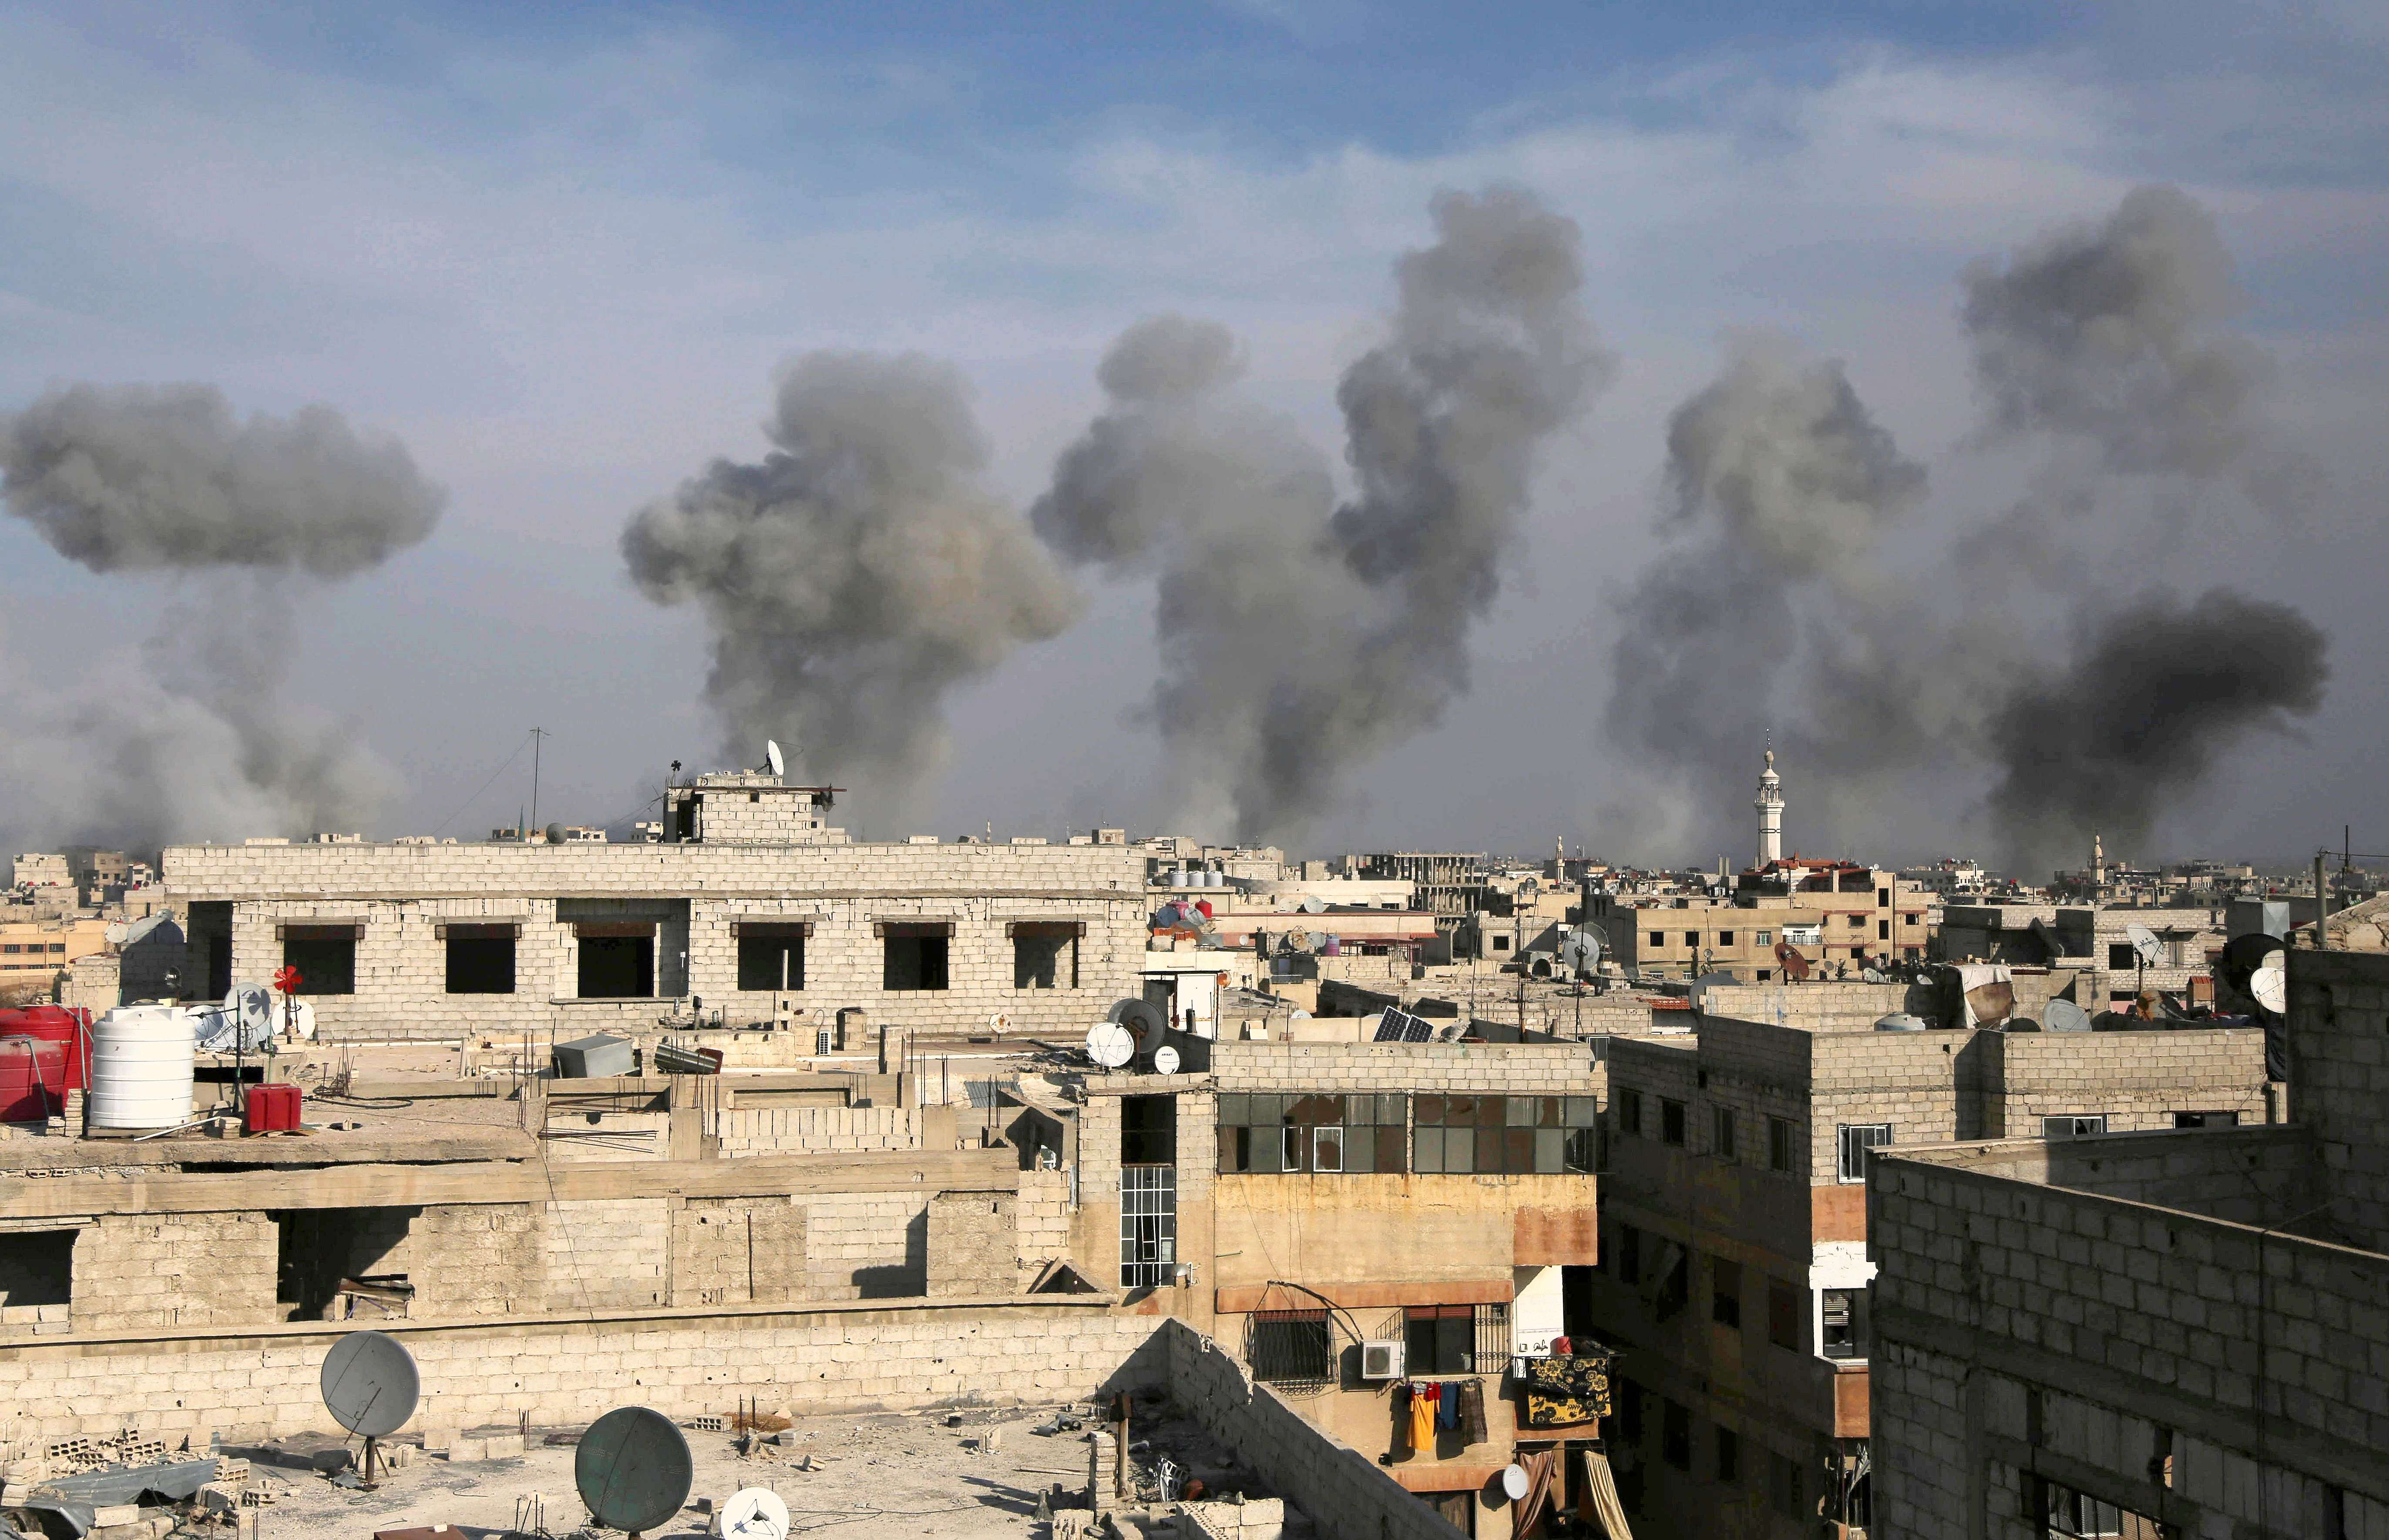 TOPSHOT - Smoke billows after air strikes by regime forces on the town of Douma in the eastern Ghouta region, a rebel stronghold east of the capital Damascus, on December 13, 2015. At least 31 civilians were killed in heavy bombardment of a besieged Syrian rebel stronghold, including near a school in Douma, east of Damascus, the Syrian Observatory for Human Rights said. AFP PHOTO / AMER ALMOHIBANY / AFP / AMER ALMOHIBANY